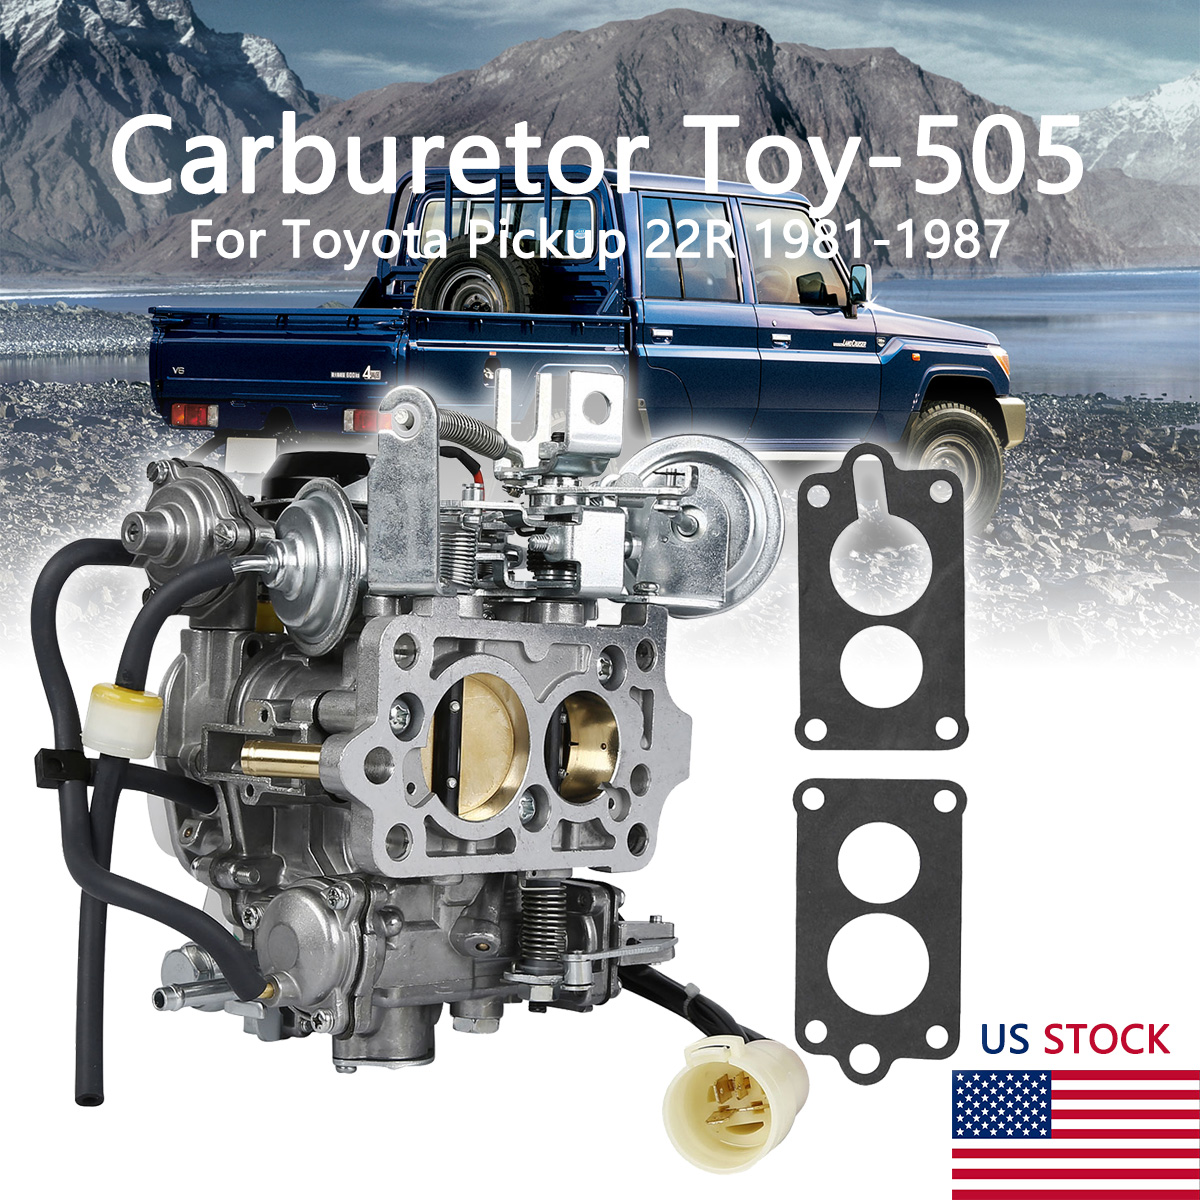 OEM Carburetor Toy-505 For Toyota Pickup 22R 1981 1982 1983 1984 1985 Can